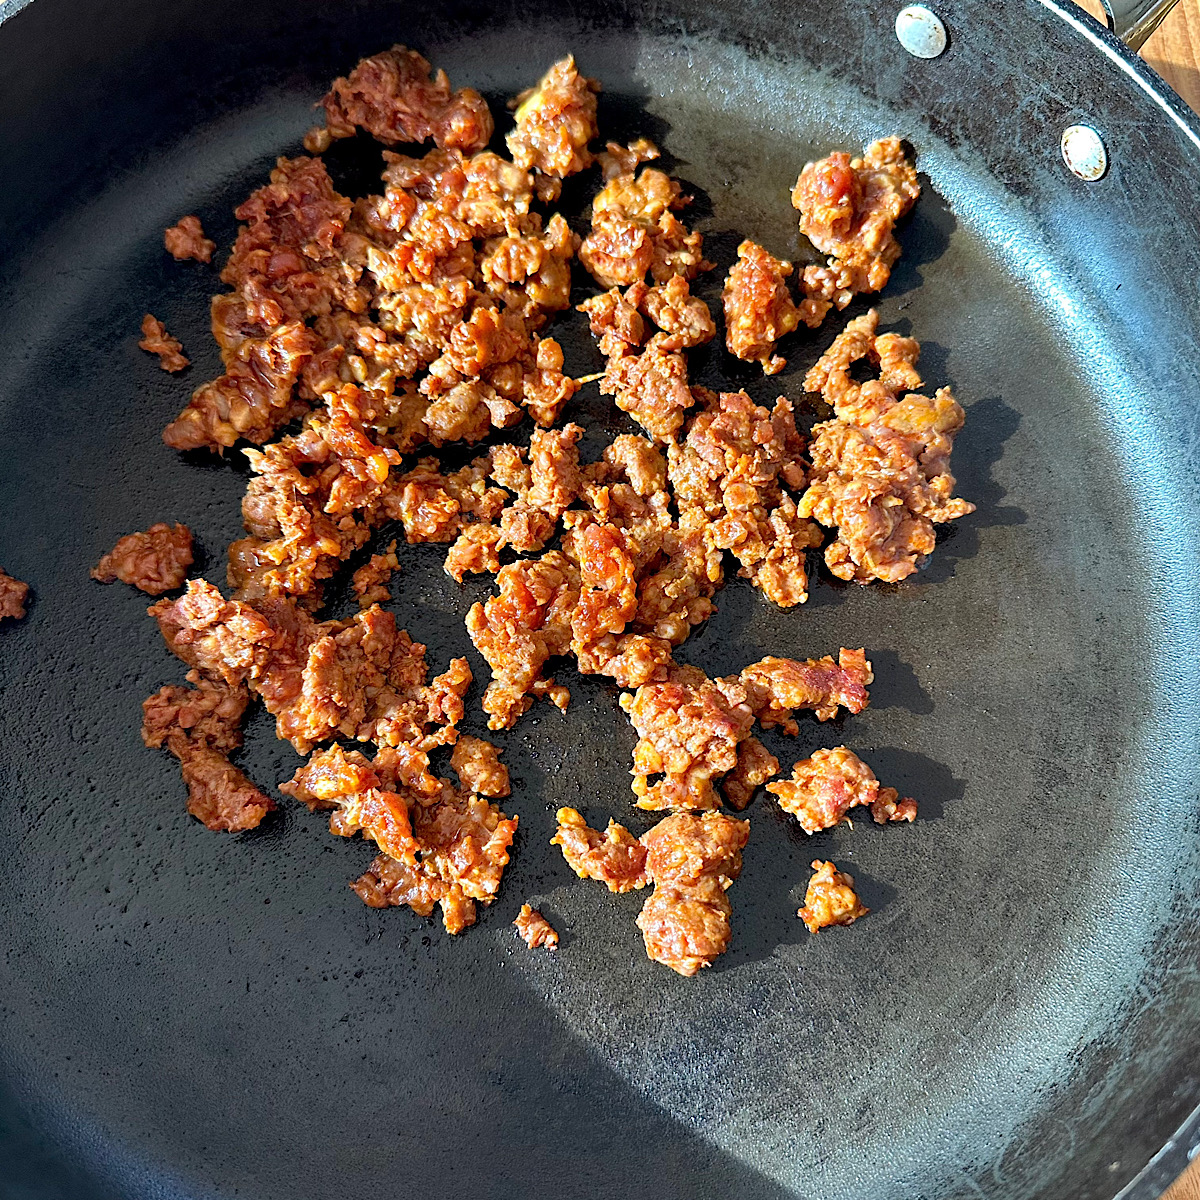 Ground chorizo cooking in a skillet.